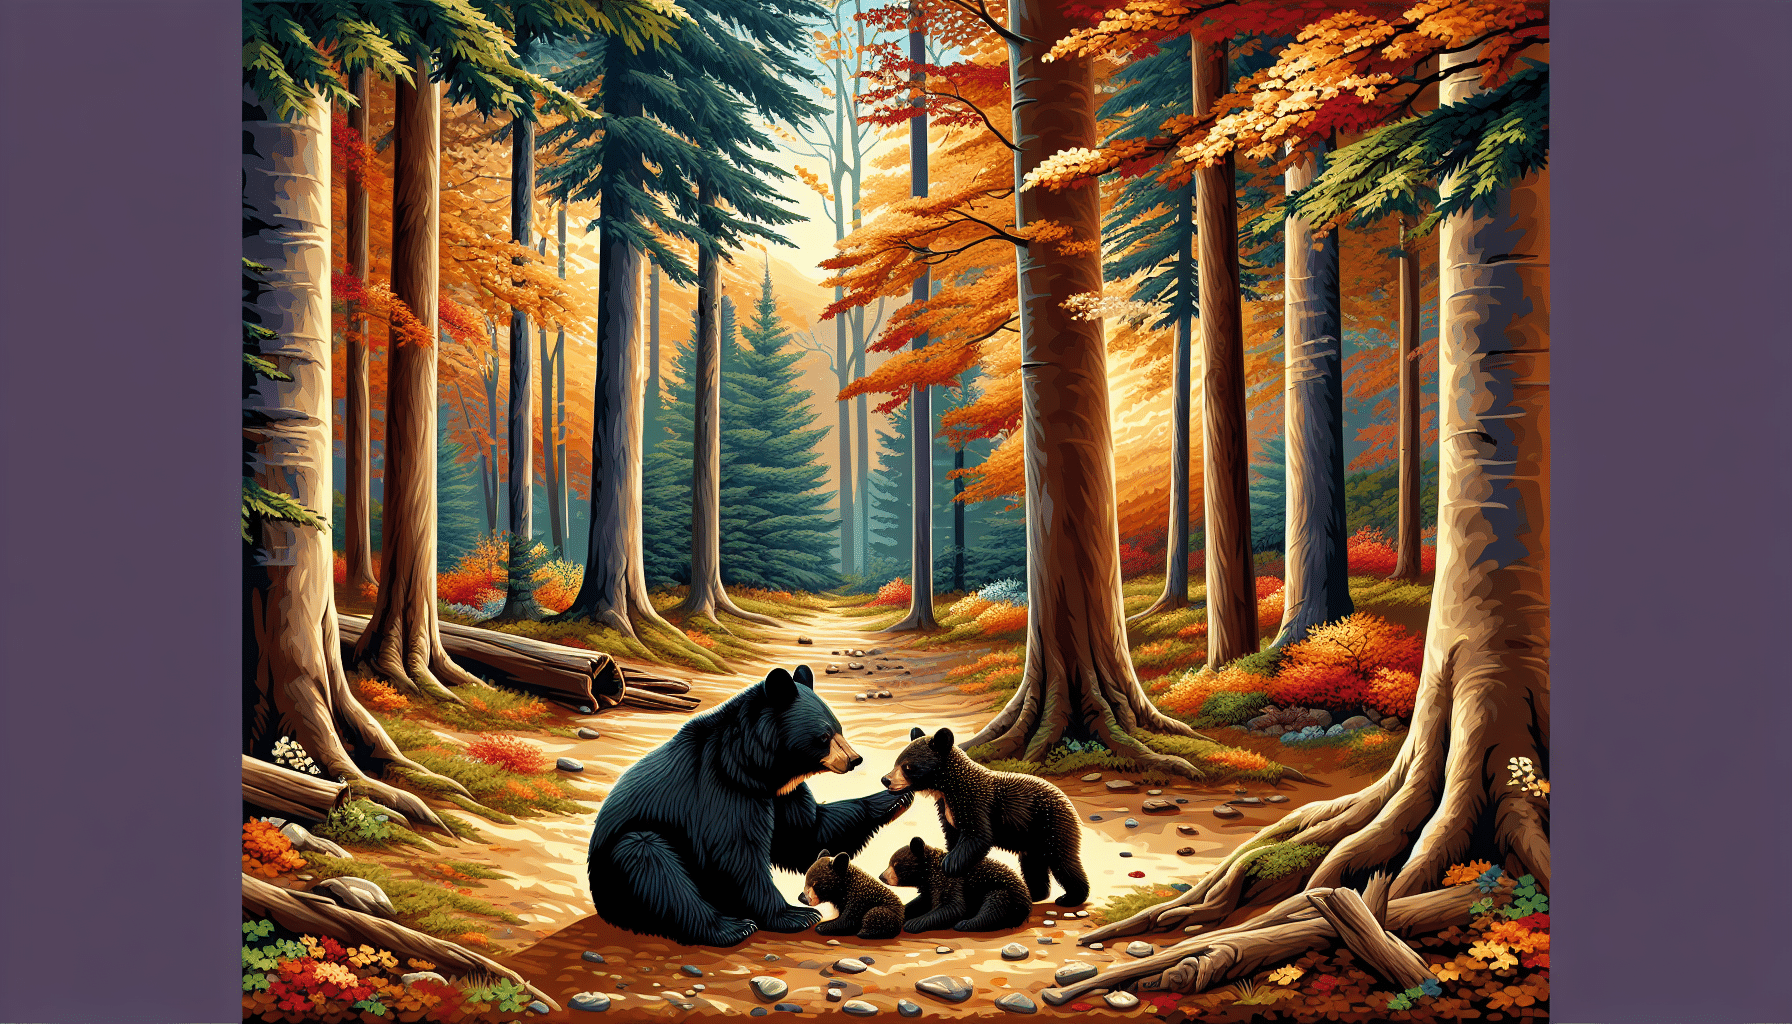 Illustrate an image of a serene forest in the fall season. The trees are adorned with different hues of warm autumn colors, and the ground is carpeted by fallen leaves. In a quiet, secluded area within the woods, depict a black bear gently caring for her newly born cubs. The mother black bear is showing gentle affection towards the tiny cubs, their fur a shiny black against the vibrant colors of the environment. The scene communicates the information without any human presence, text, or brand logo.